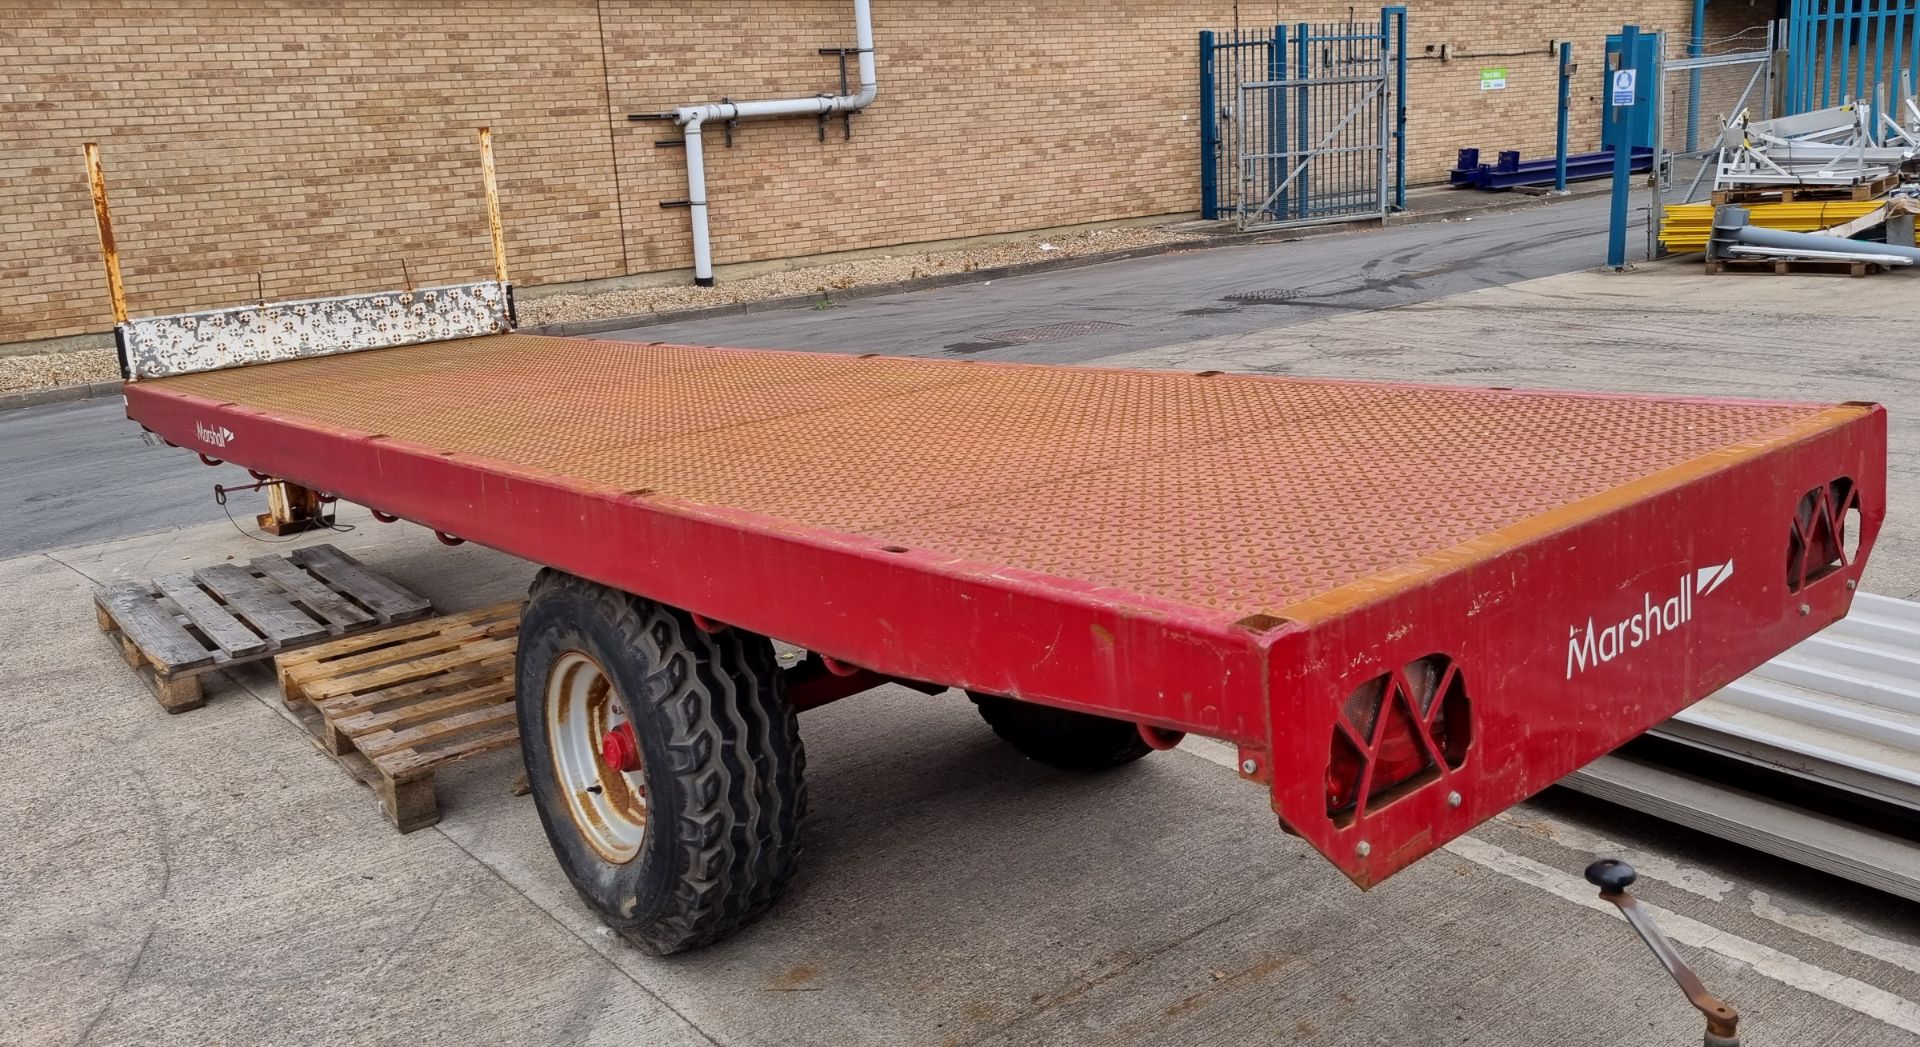 Marshall BC18N 2019 single axle flatbed trailer - 5000 kg carrying capacity - 40kph max design speed - Image 2 of 8